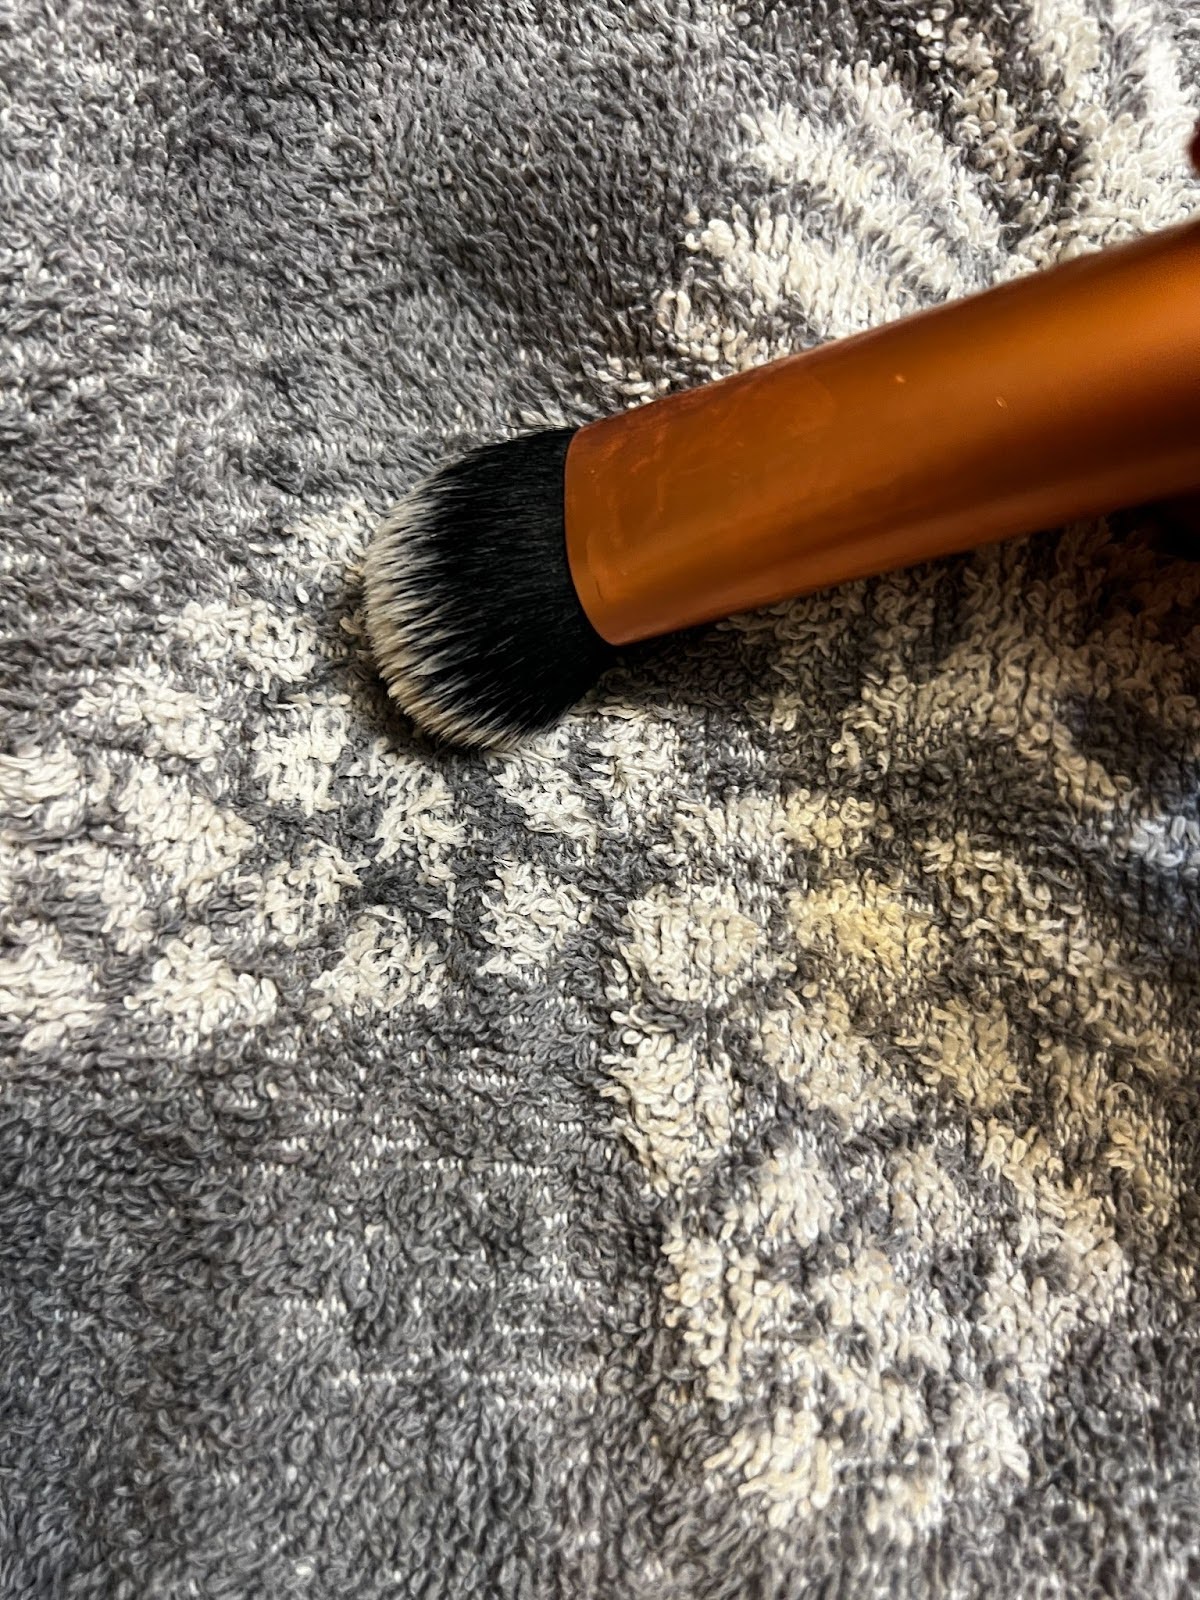 Gently rub the brush bristles on a dry towel (microfiber is best) to get rid of excess water.